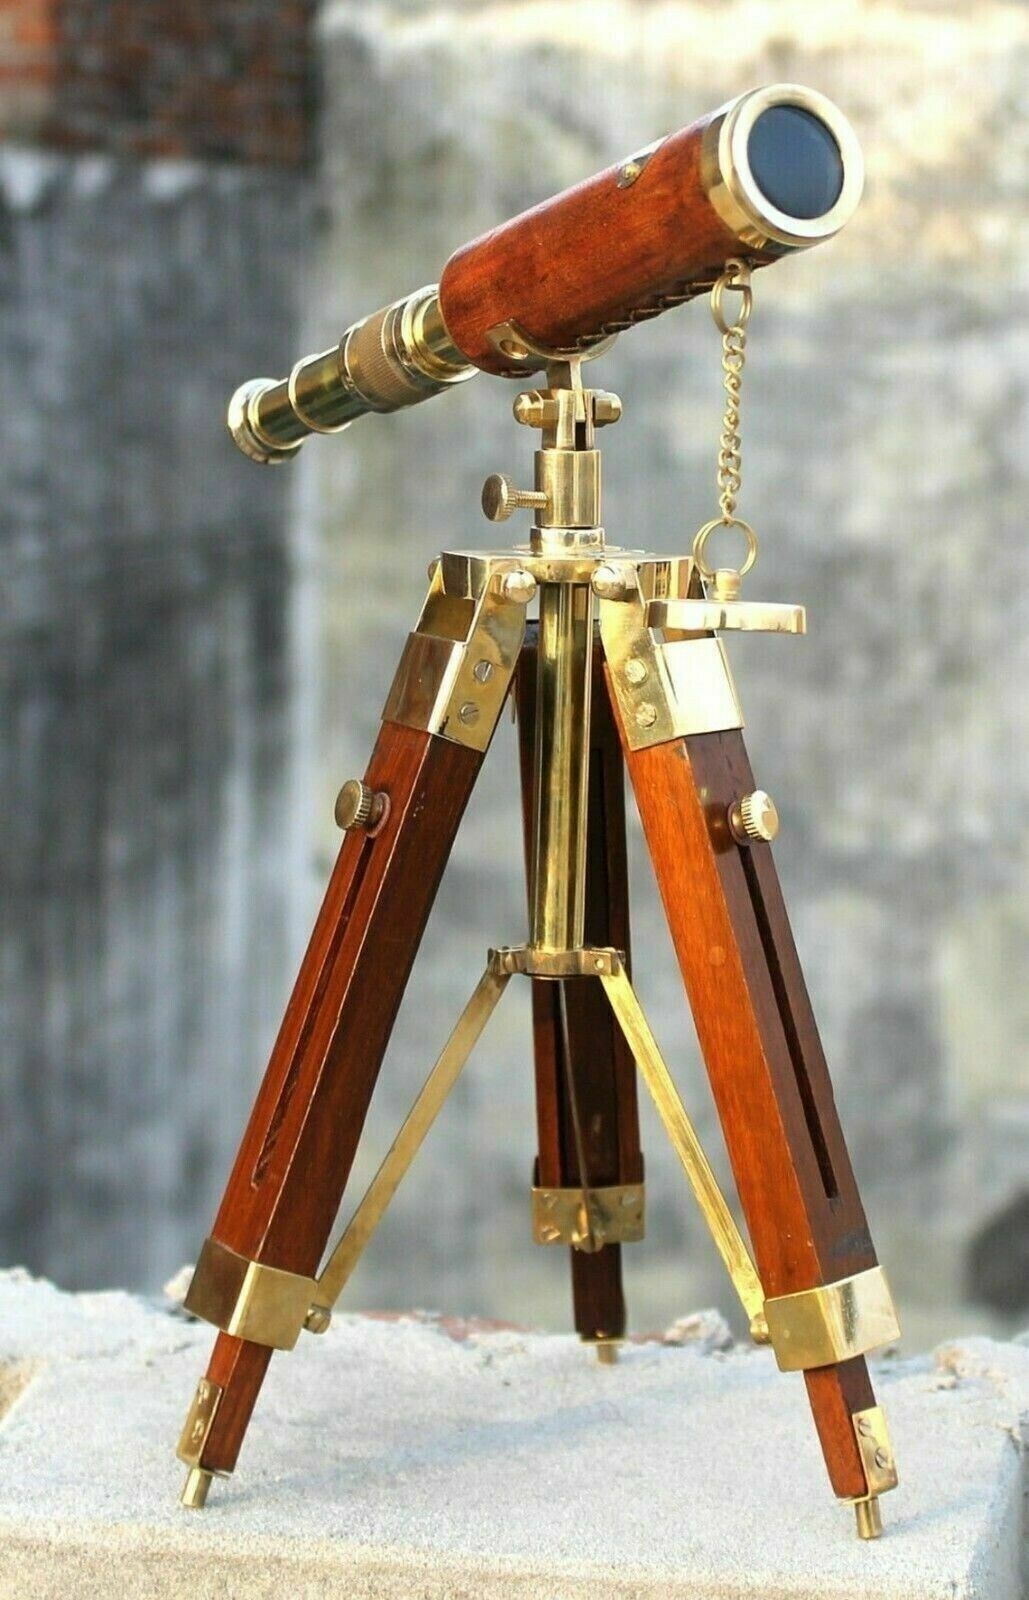 Nautical Brass Leather Covering Telescope Antique With Wooden Tripod Stand Gift